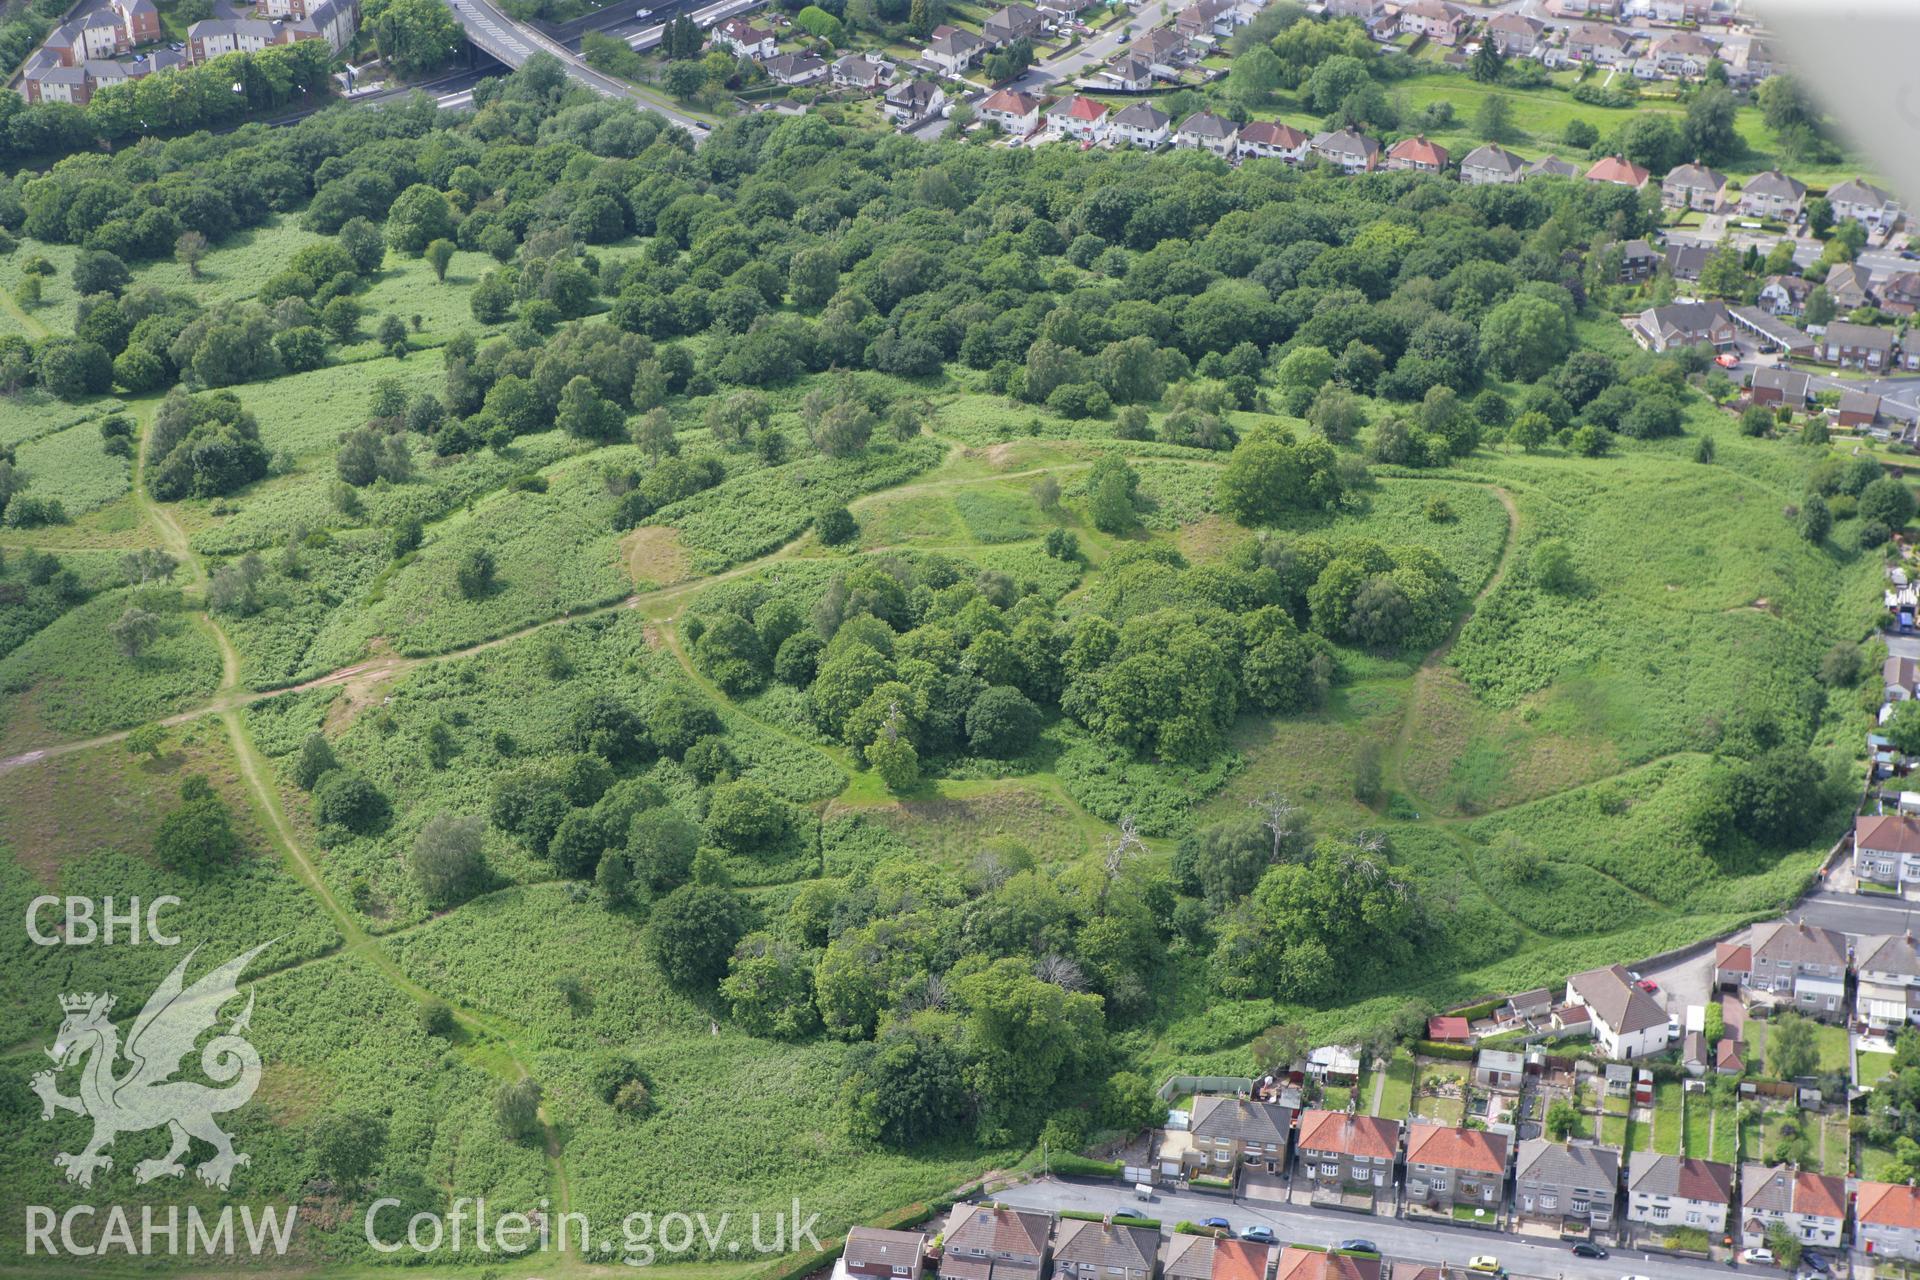 RCAHMW colour oblique photograph of Tredegar Fort. Taken by Toby Driver on 13/06/2011.